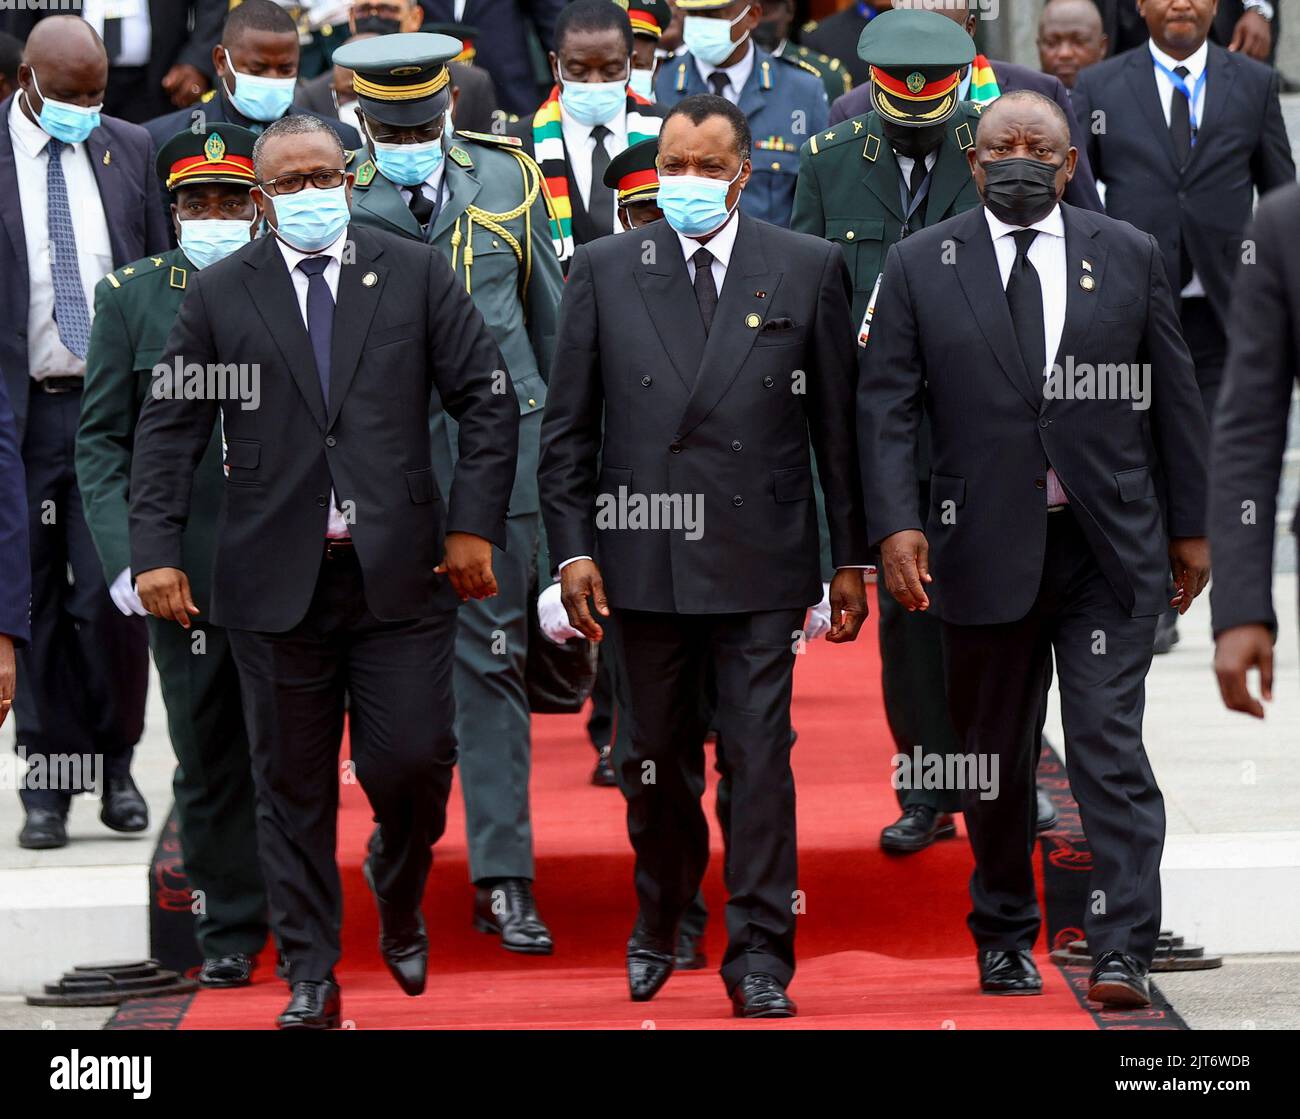 Guinea-Bissau's President Umaro Sissoco Embalo, Republic of Congo's President Denis Sassou Nguesso and South Africa's President Cyril Ramaphosa arrive for the funeral of Angola's former President Jose Eduardo dos Santos who died in Spain in July, at the Agostinho Neto Memorial, in Luanda, Angola, August 28, 2022. REUTERS/Siphiwe Sibeko Stock Photo